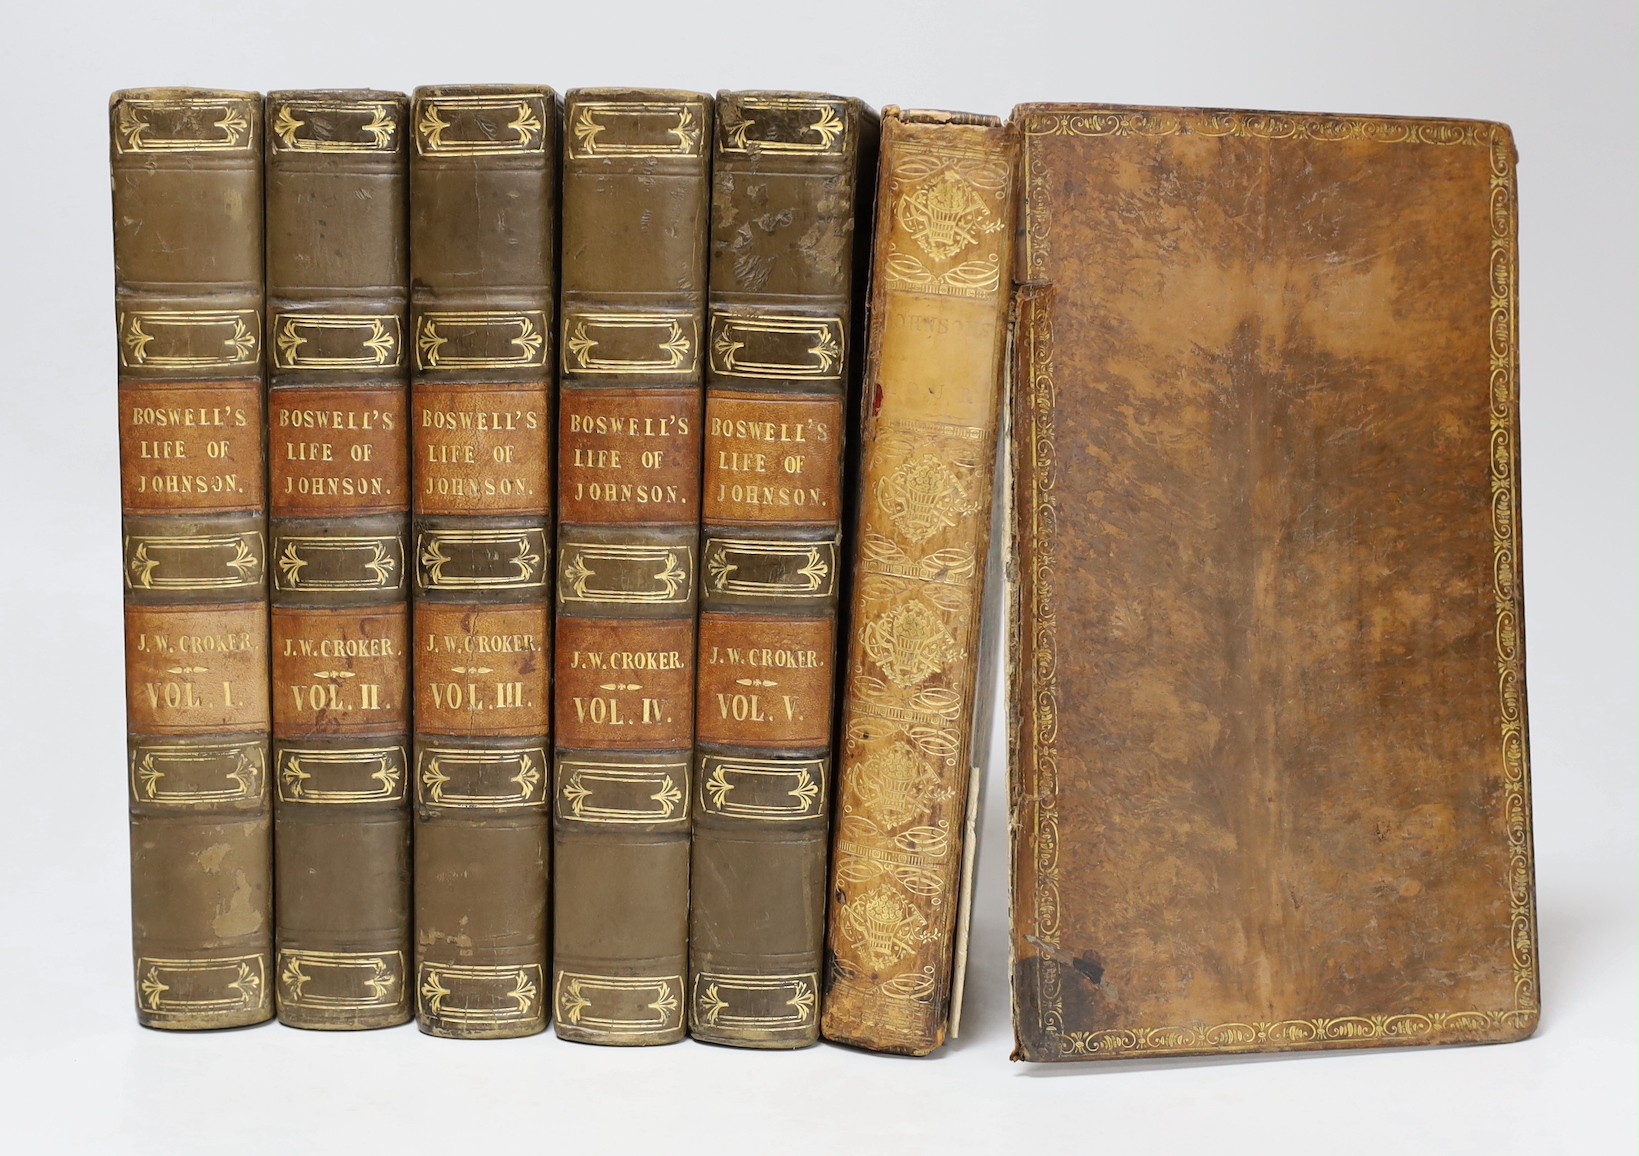 Boswell, James - Life of Johnson, with numerous additions and notes by John Wilson Croker, 5 vols, 8vo, calf, John Murray, 1831 and Johnson, Samuel - Journey to the Western Isles, 1st edition, 6 line errata at end, 8vo,